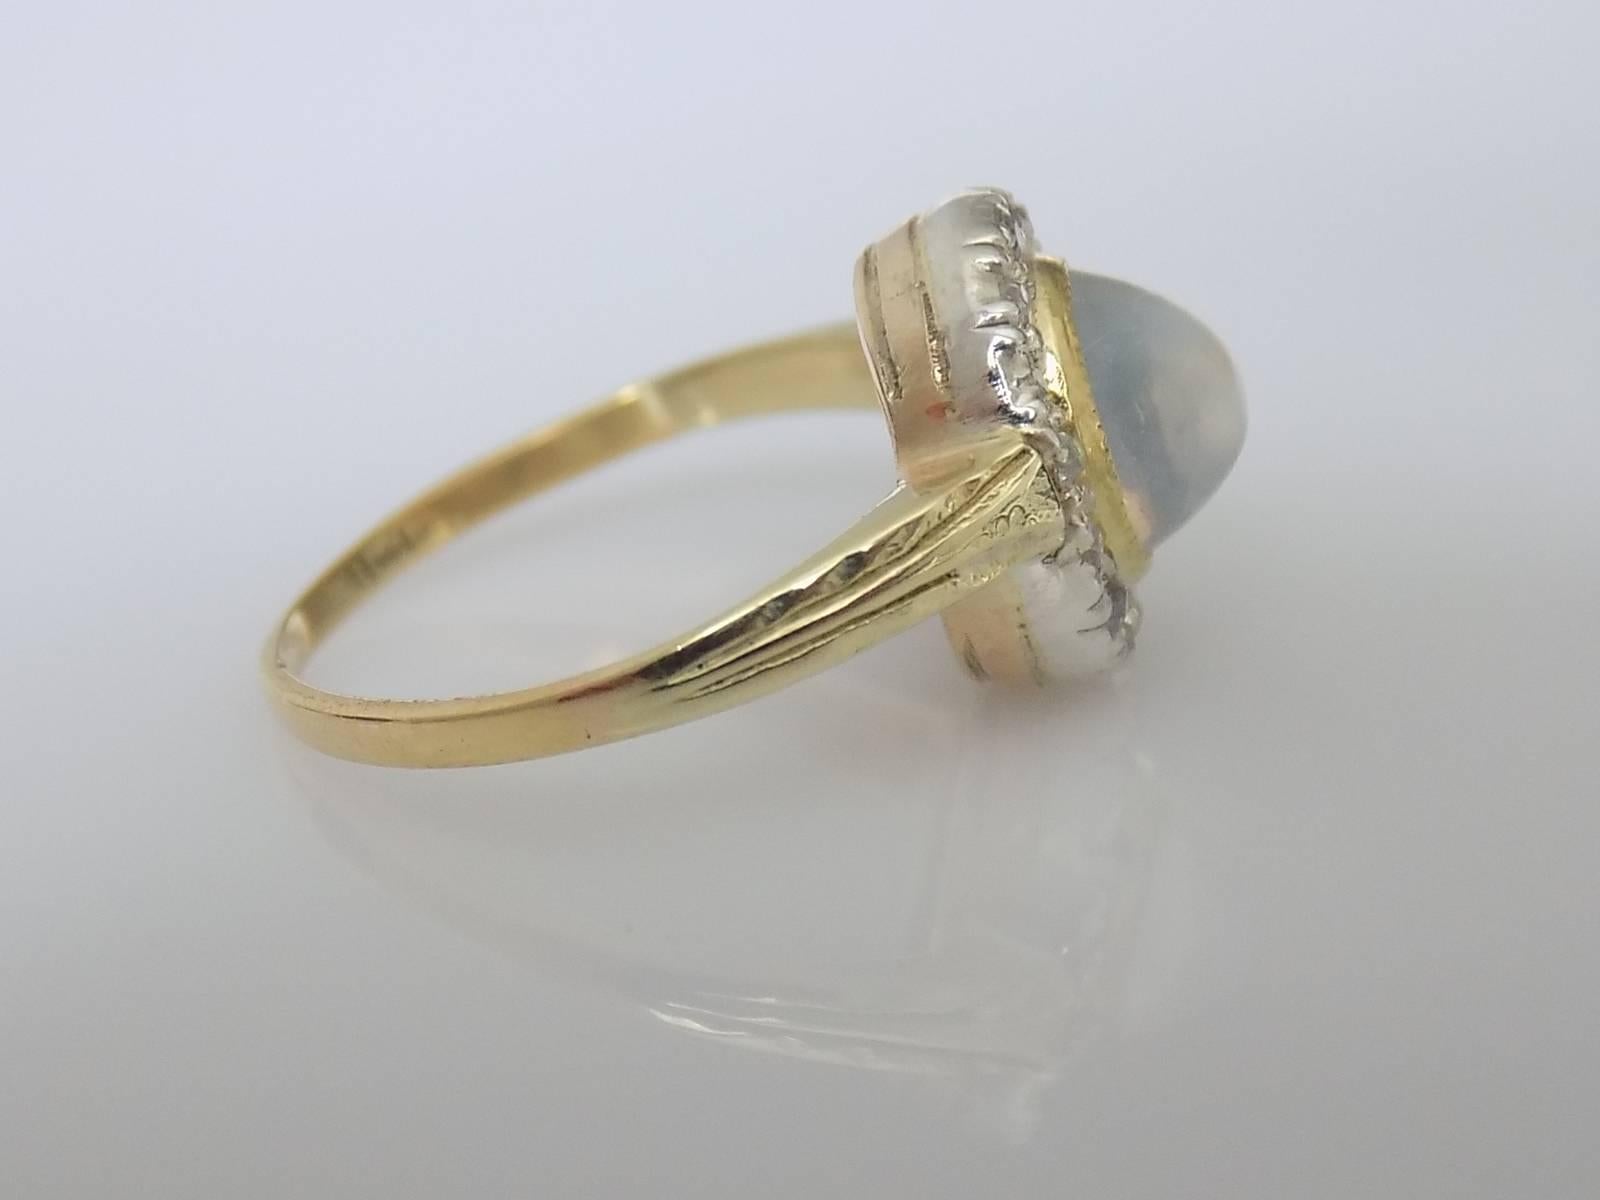 An Edwardian c.1910s timeless classic 18 Carat Gold, Moonstone and old European cut Diamond Halo ring. Diamonds mounted in Platinum setting. 
English origin.
Size O UK, 7.5 US  (sizable). 
Height of the face 12mm. 
Unmarked, tested 18 Carat Gold and